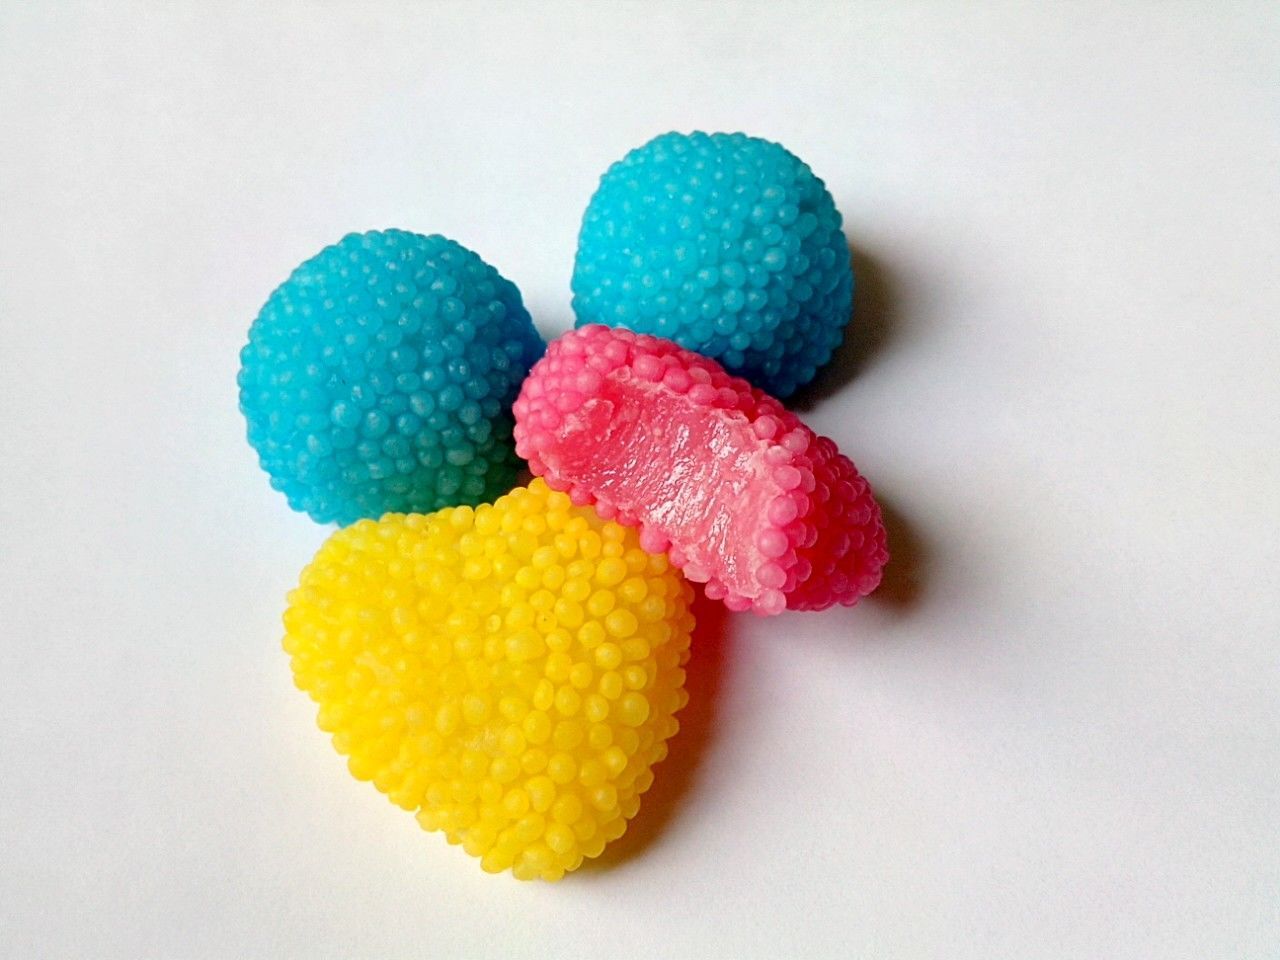 Close-up of multi colored sweet balls against white background